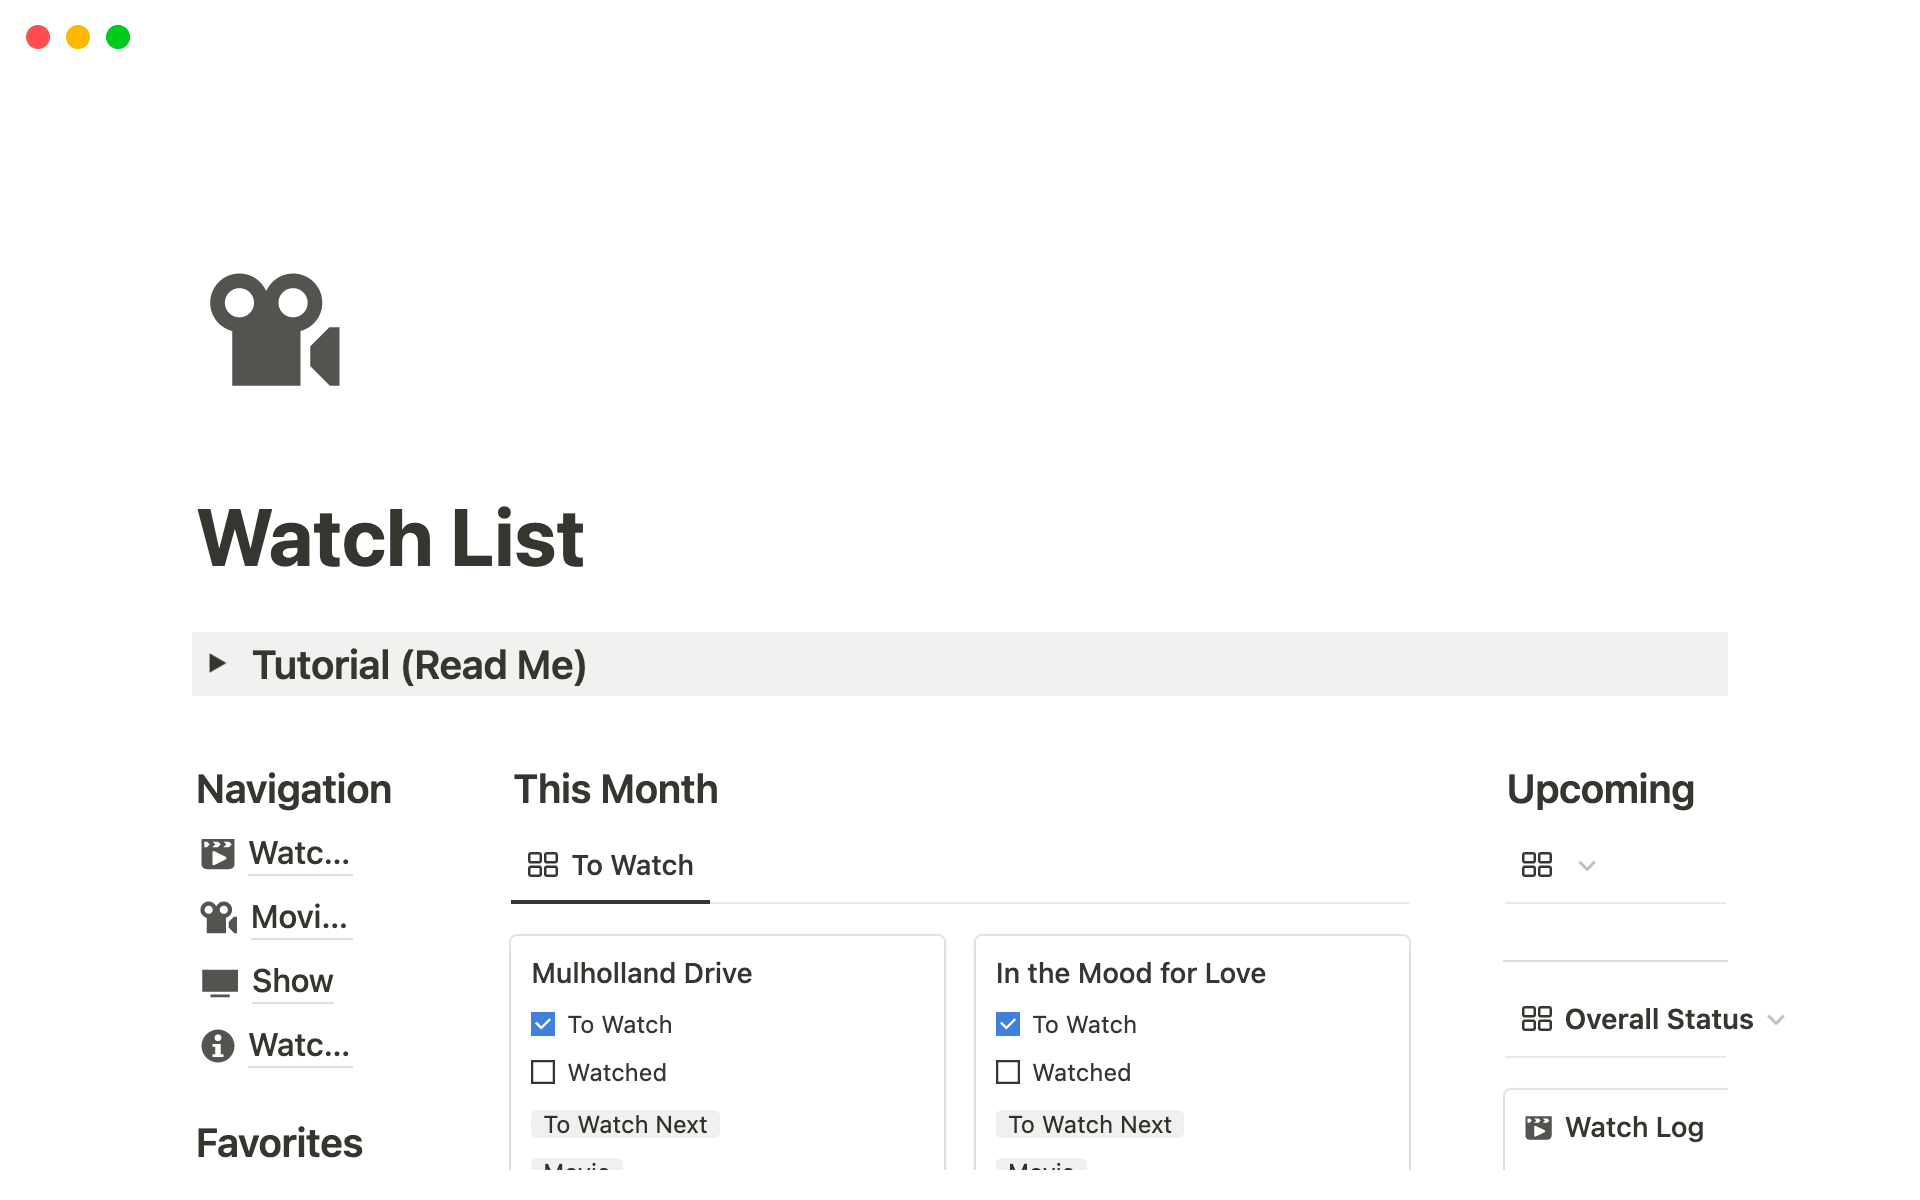 Never miss a movie or show with the Watch List Notion Template - organize what you're watching or want to watch, and track release dates.